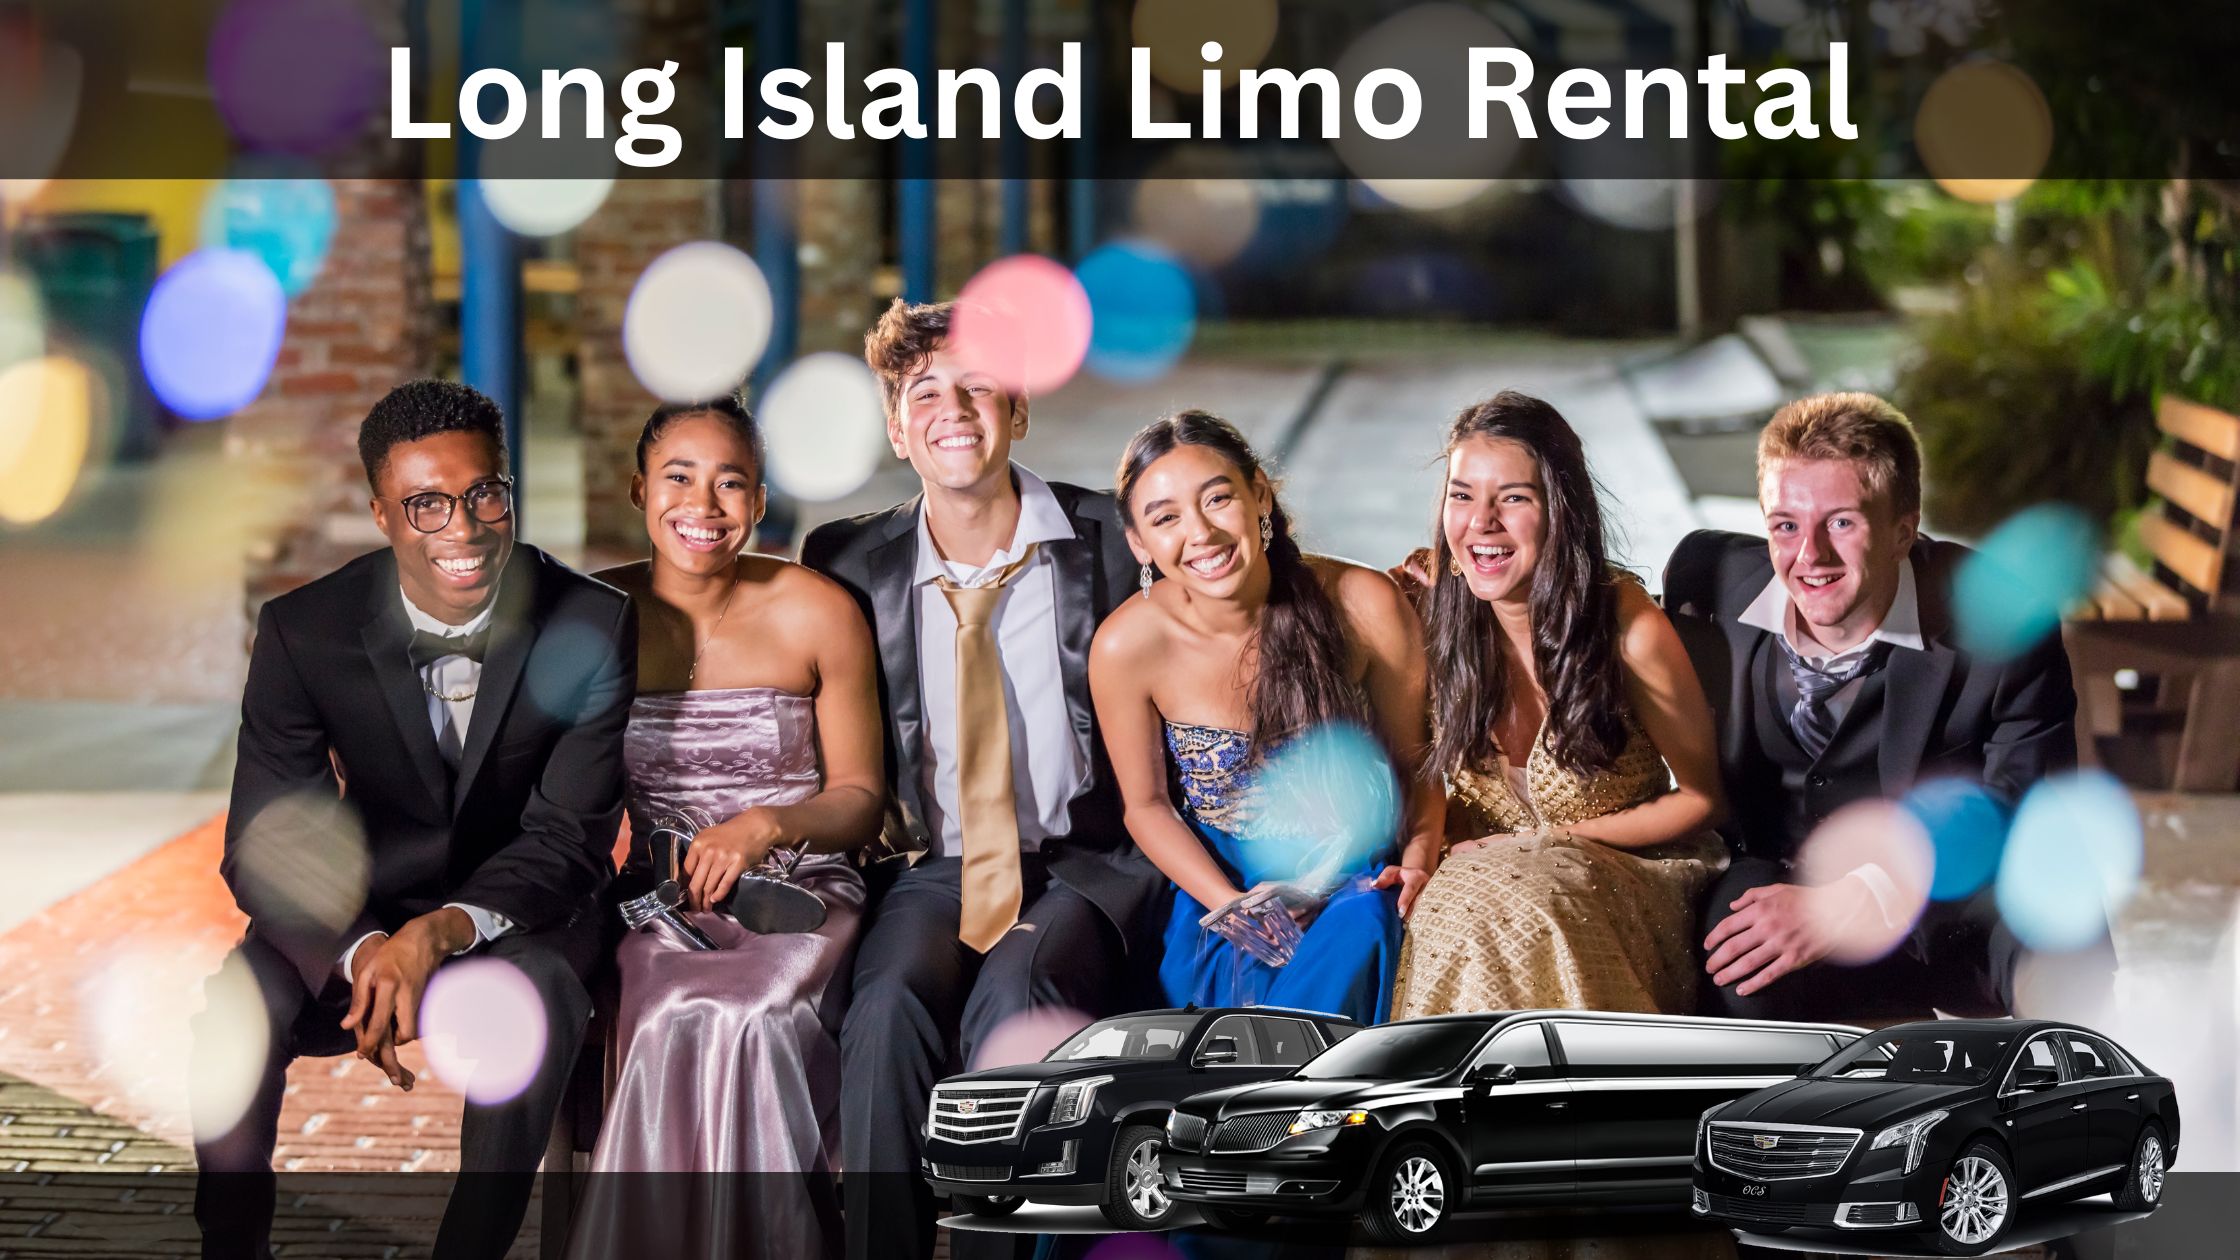 Book a Prom Limo Rental in Long Island, NY – Make Your Night Unforgettable